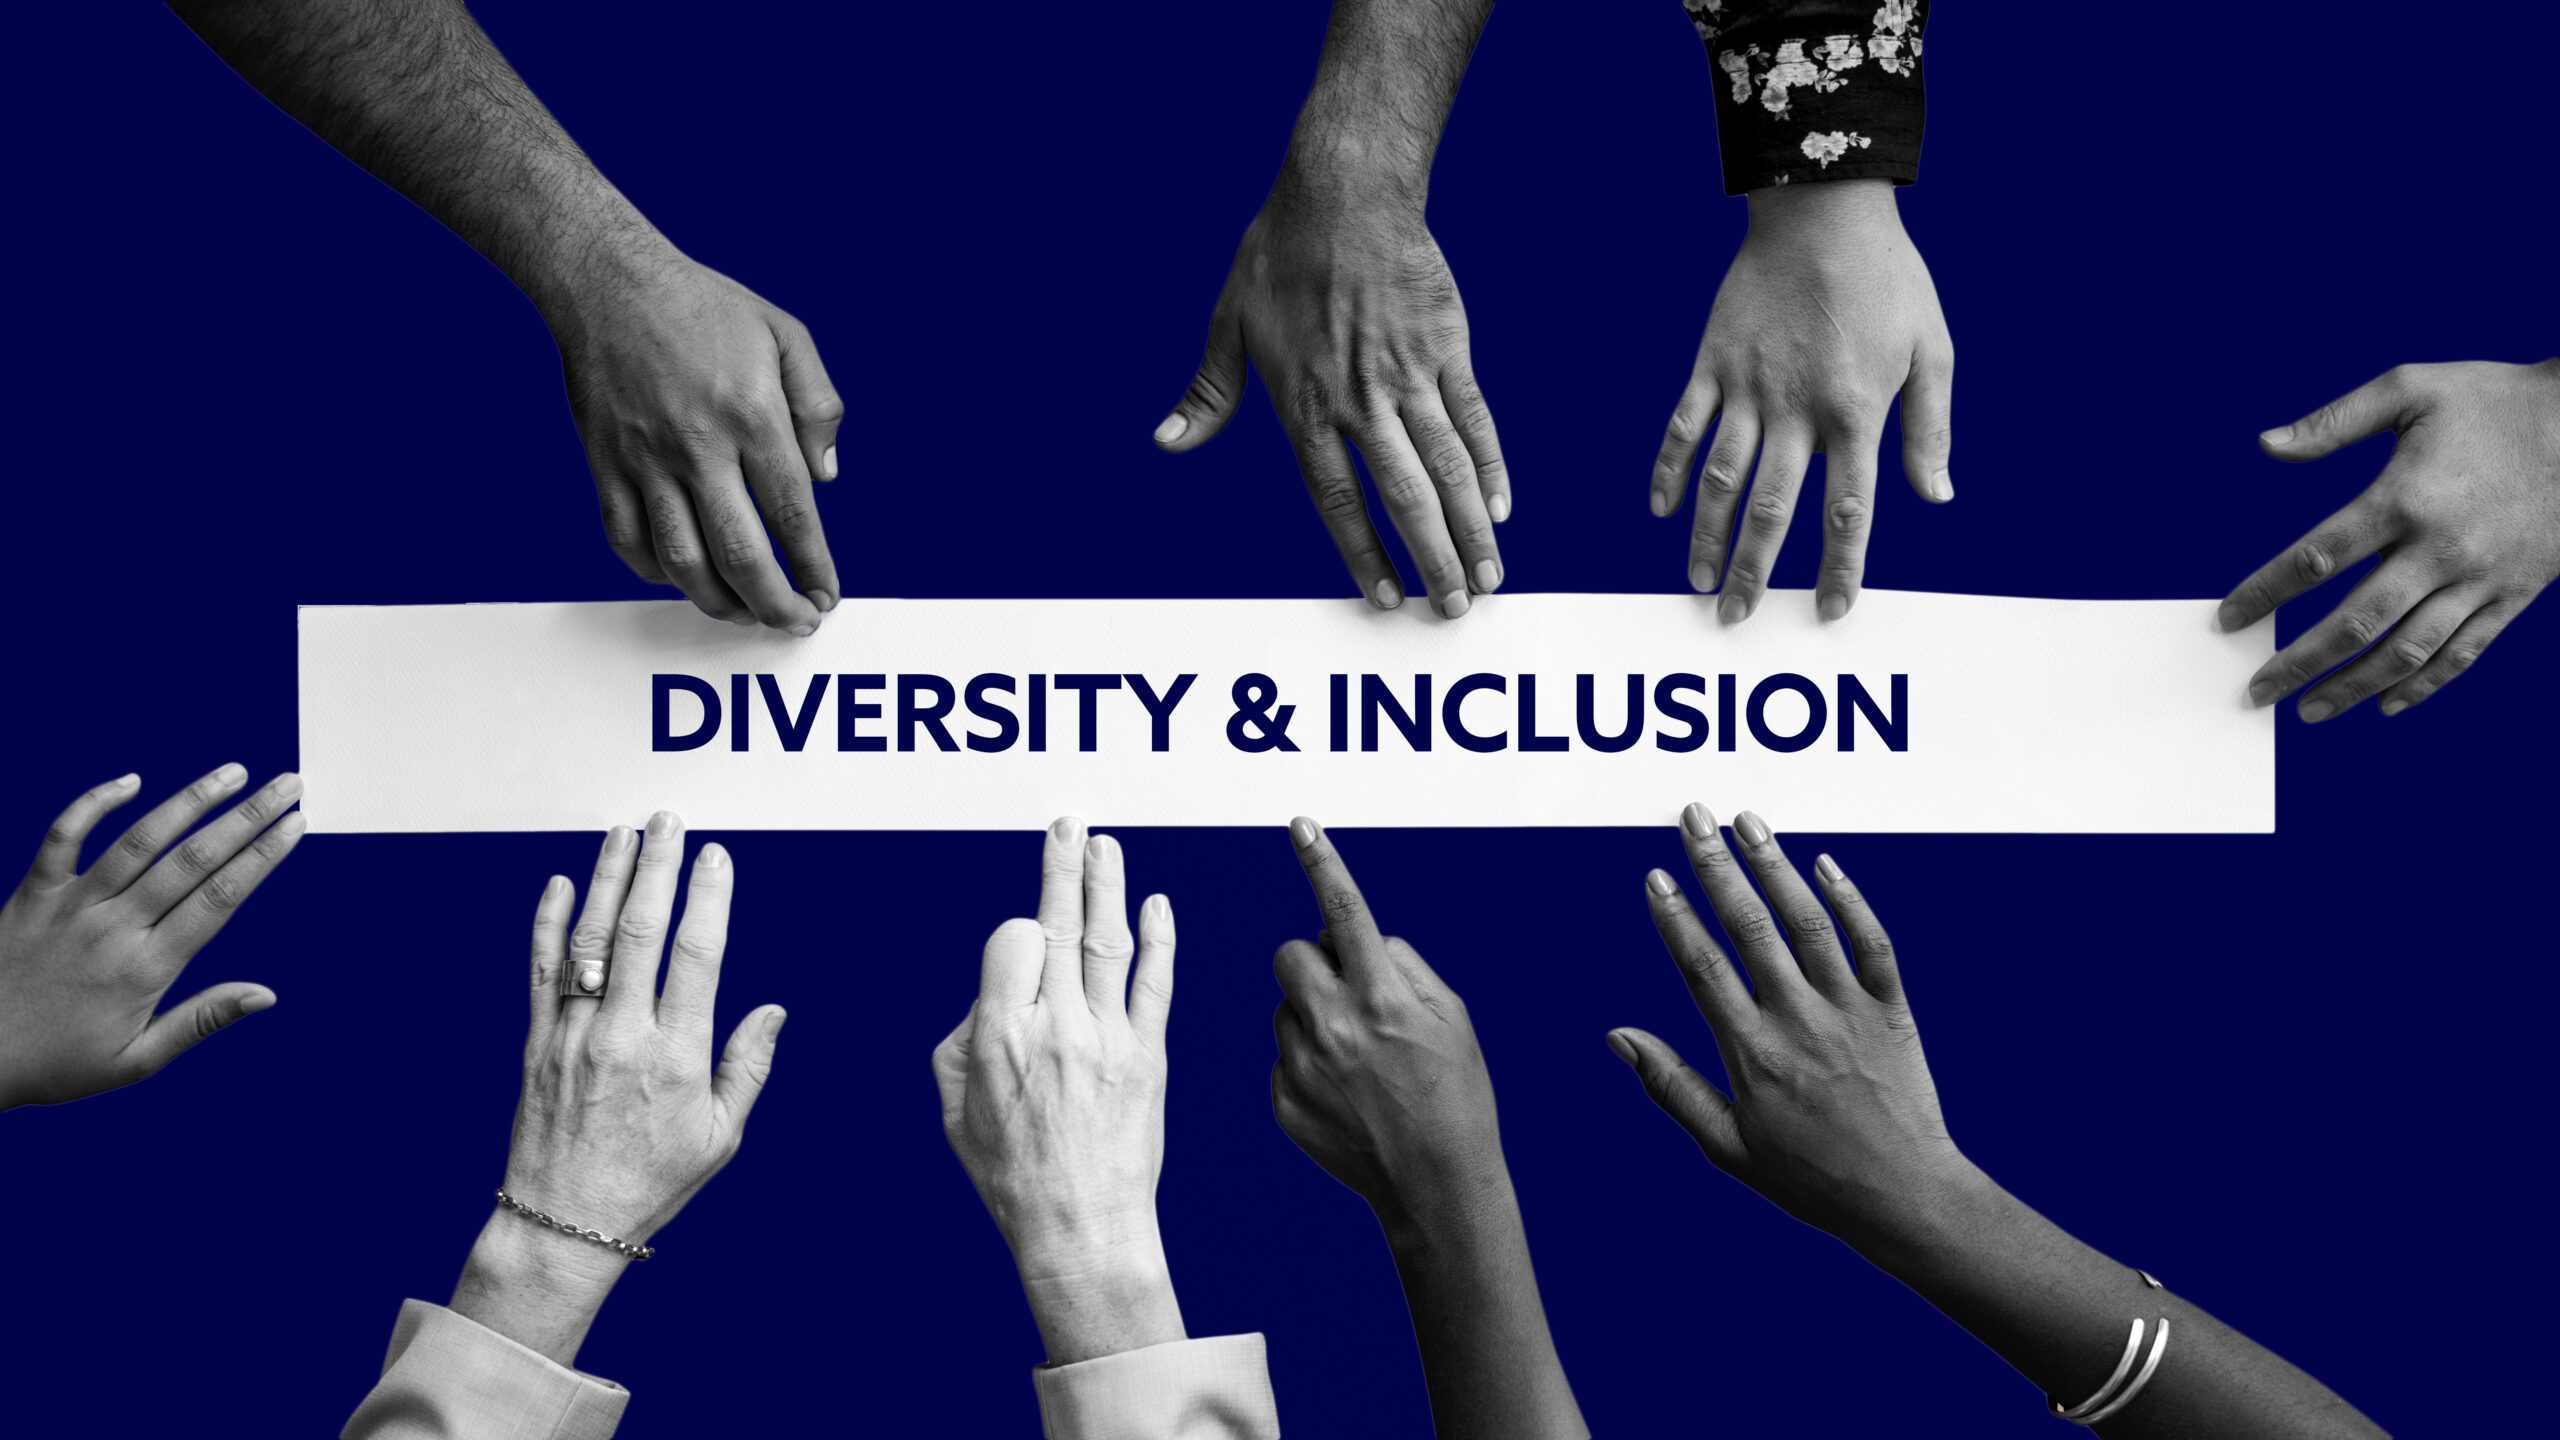 6 tips to promote a more inclusive work environment